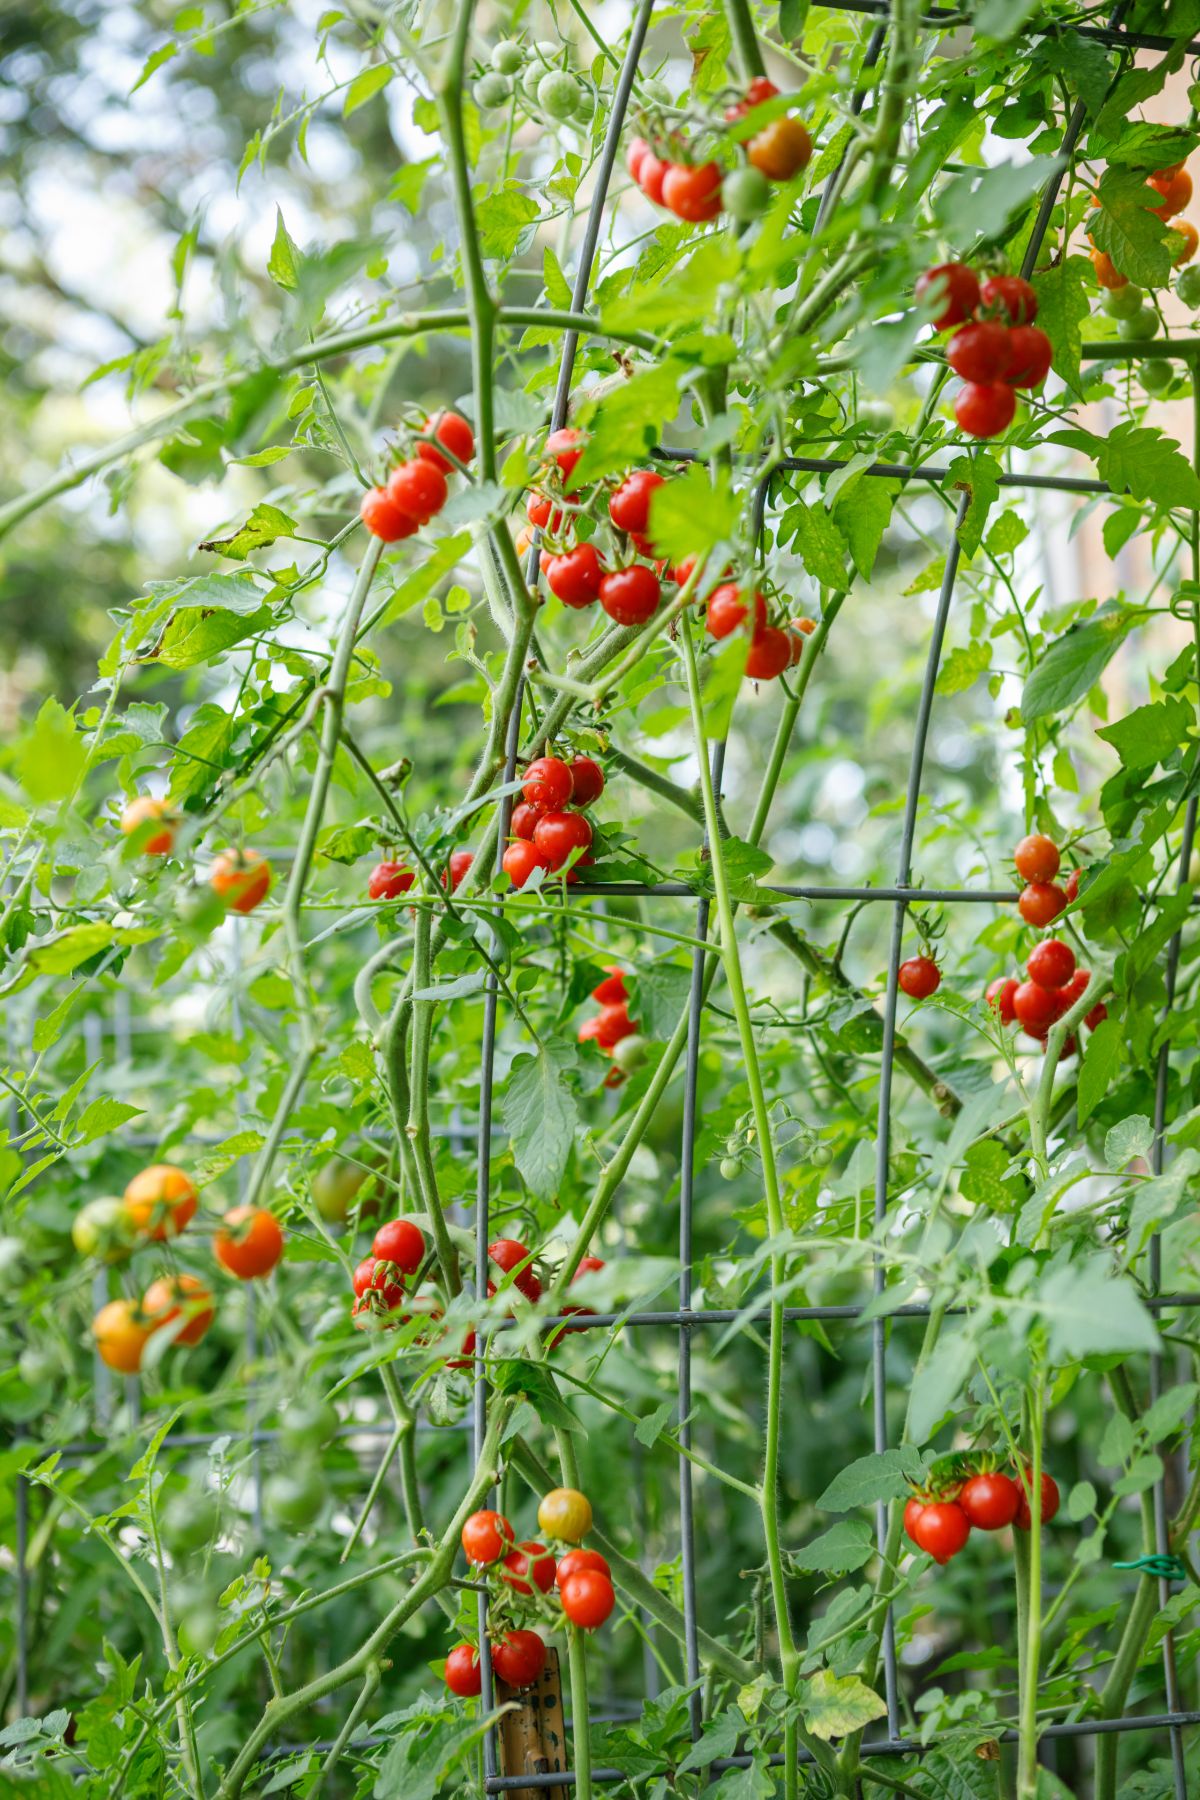 Tomatoes grown along the sides of a trellis arch